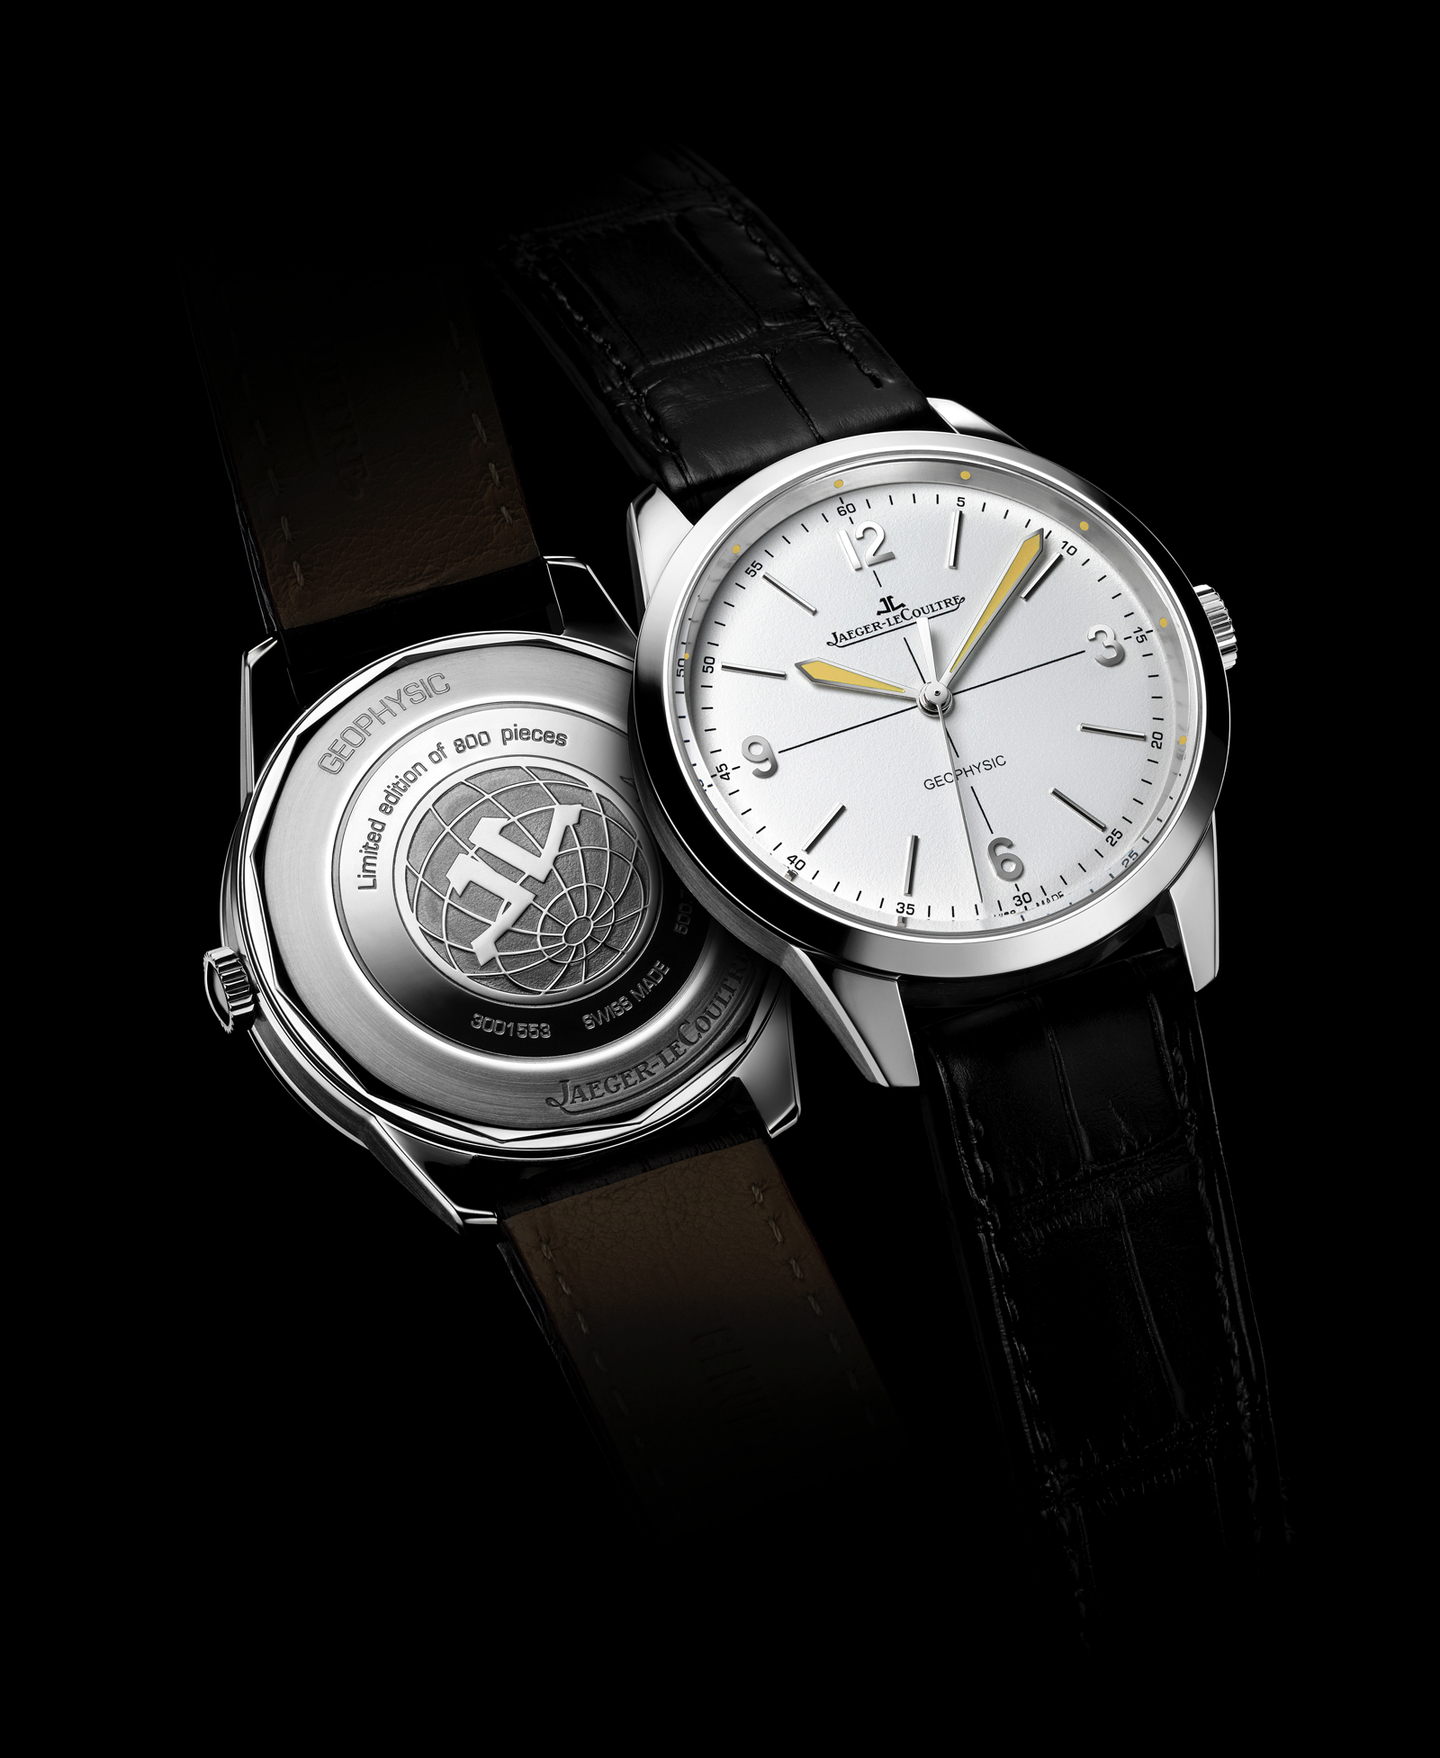 Introducing the Jaeger-LeCoultre Tribute to the Geophysic 1958